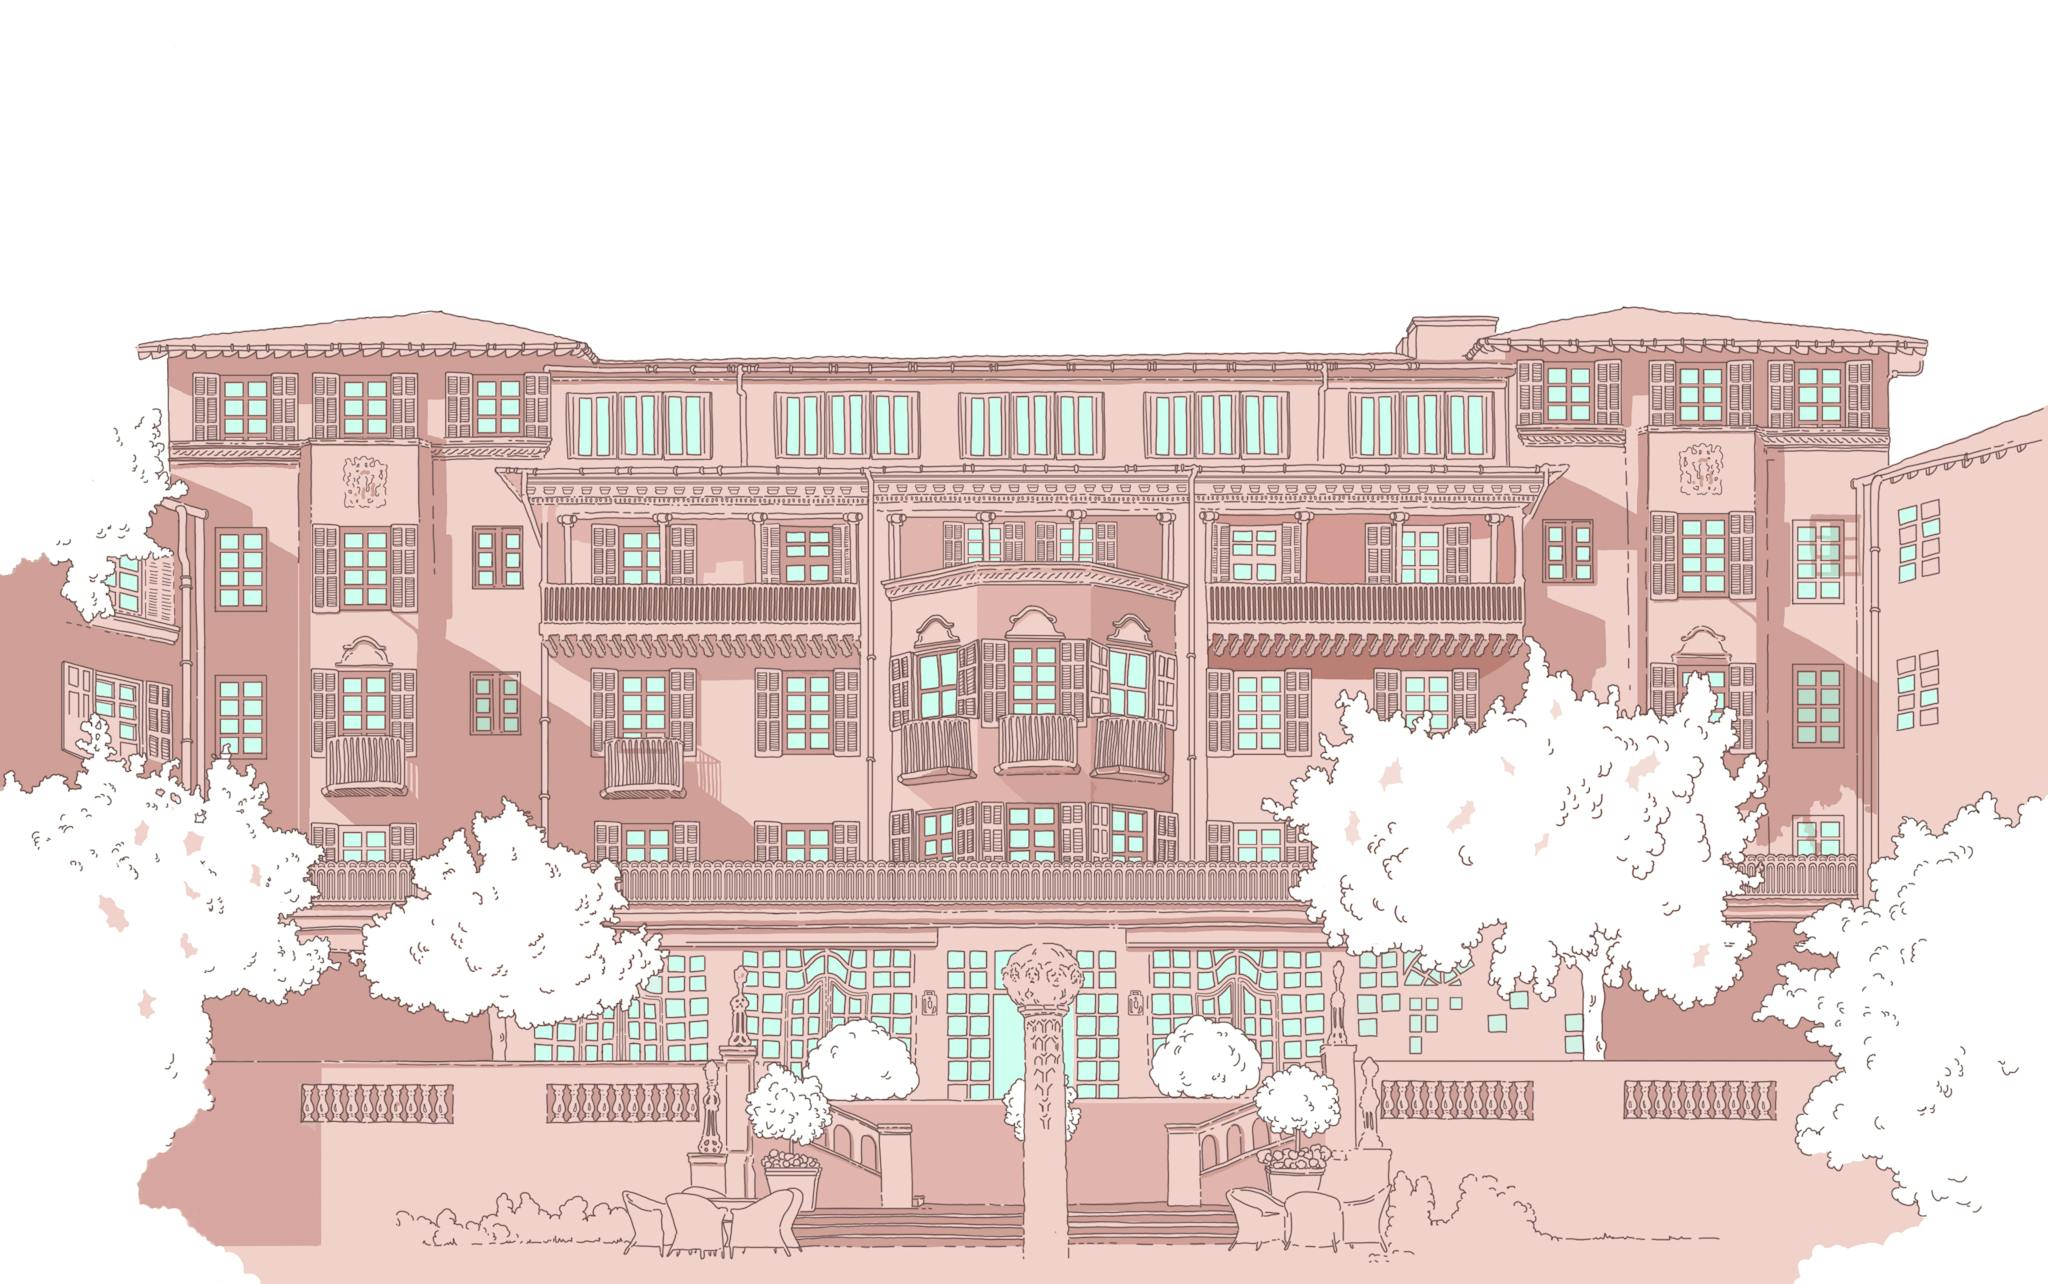 Mount Nelson hotel digitally colored in pink.